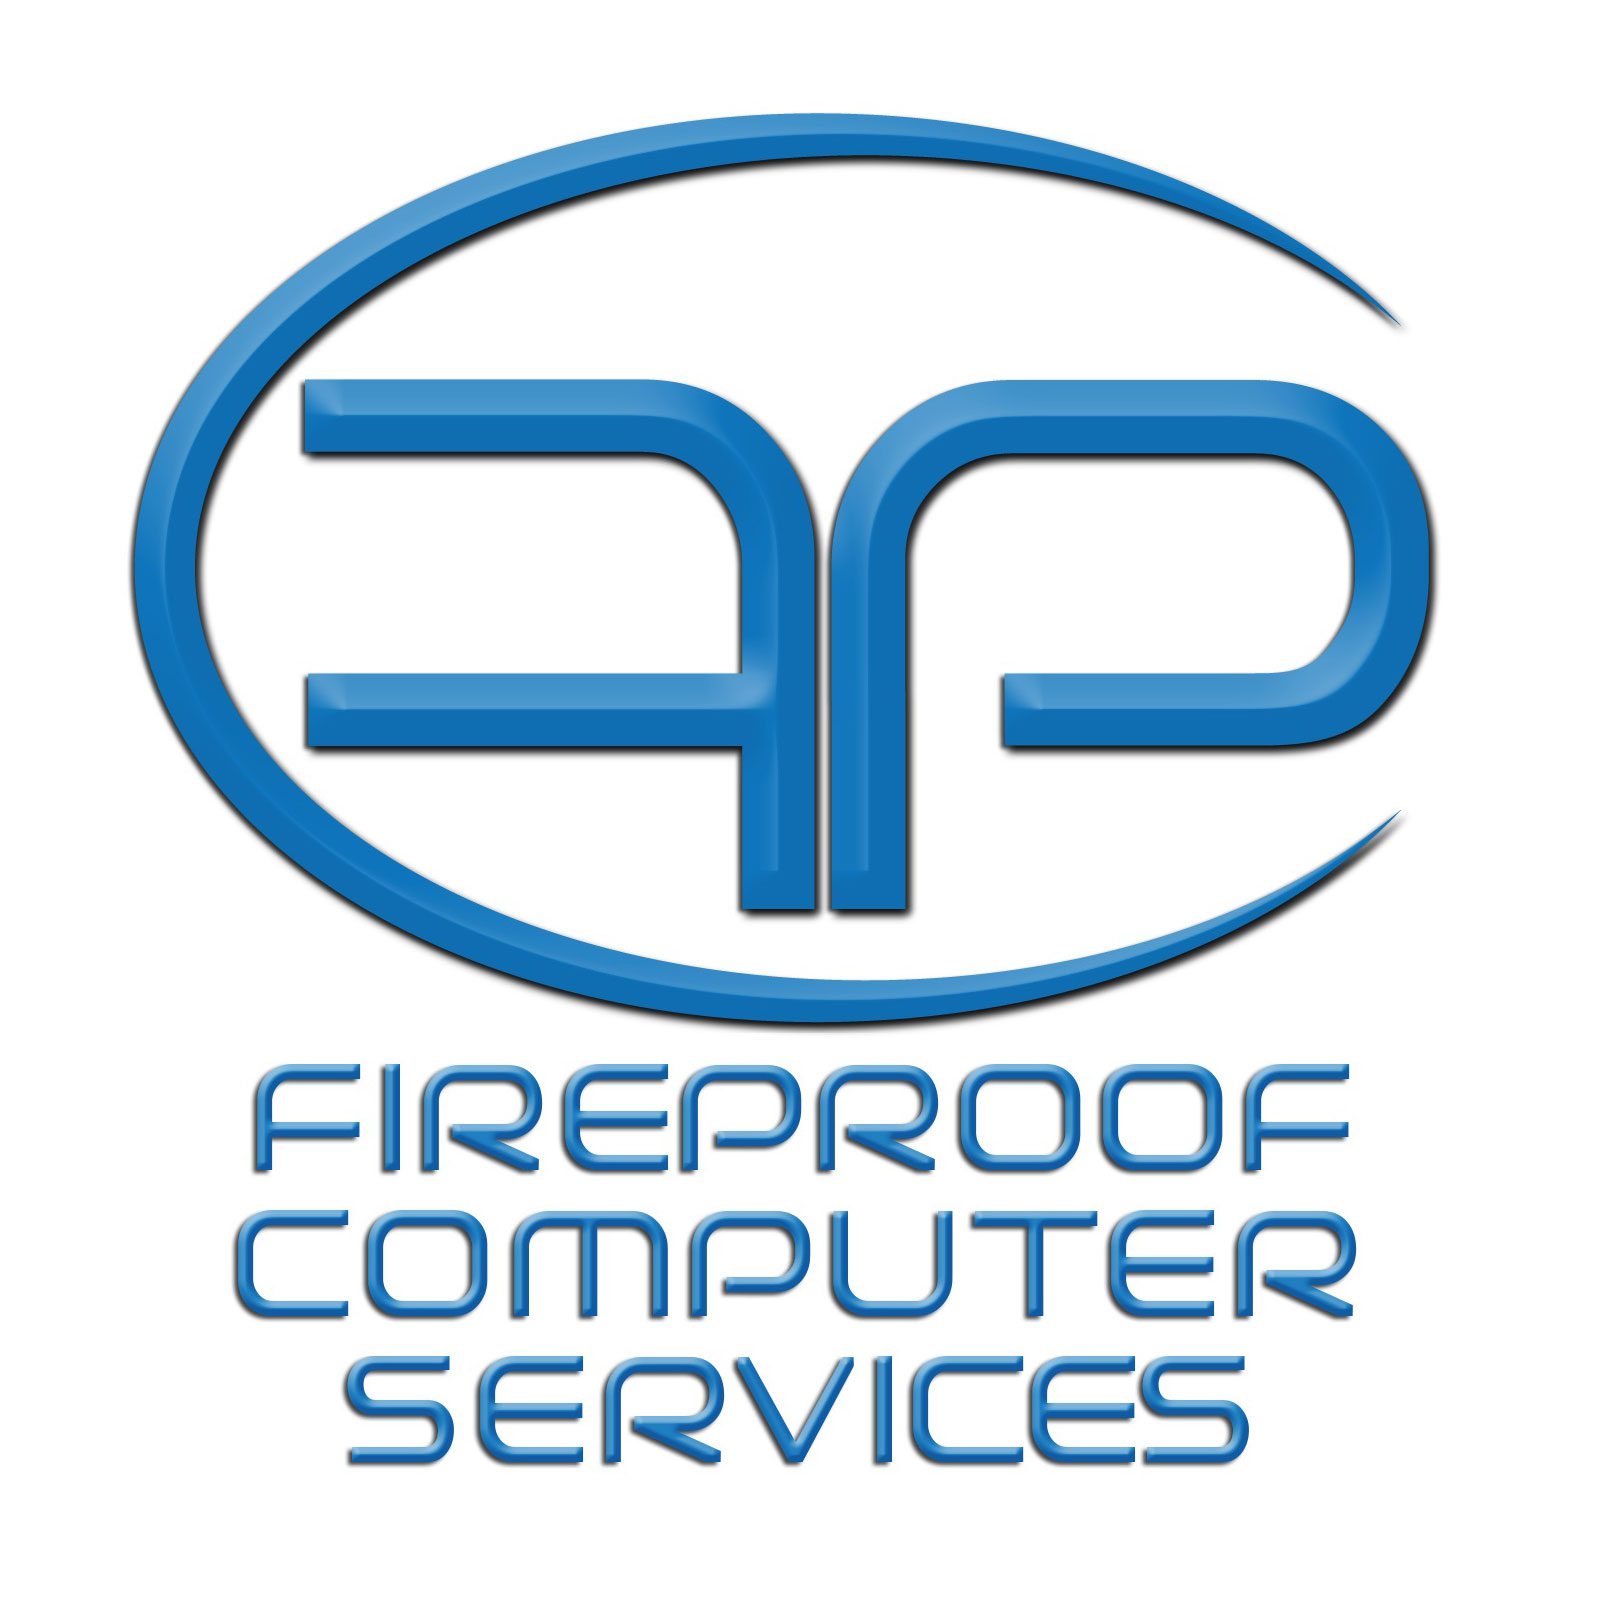 Fireproof Computer Services